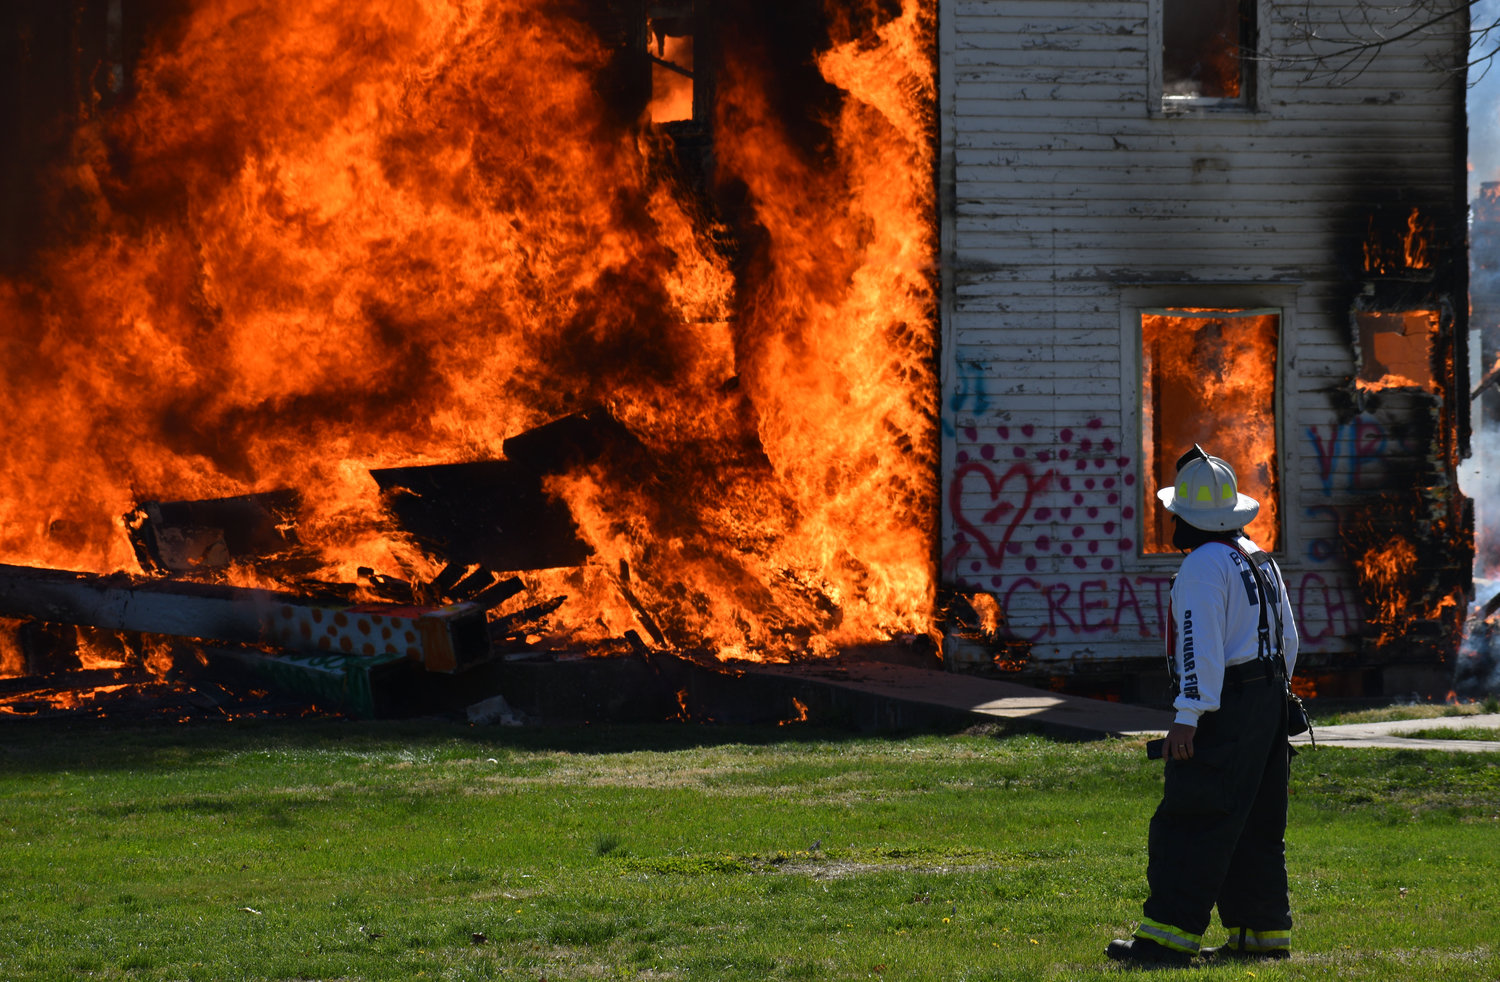 Bolivar City Fire Chief Brent Watkins watches intently as the White House burns during a controlled fire training Saturday, April 9.